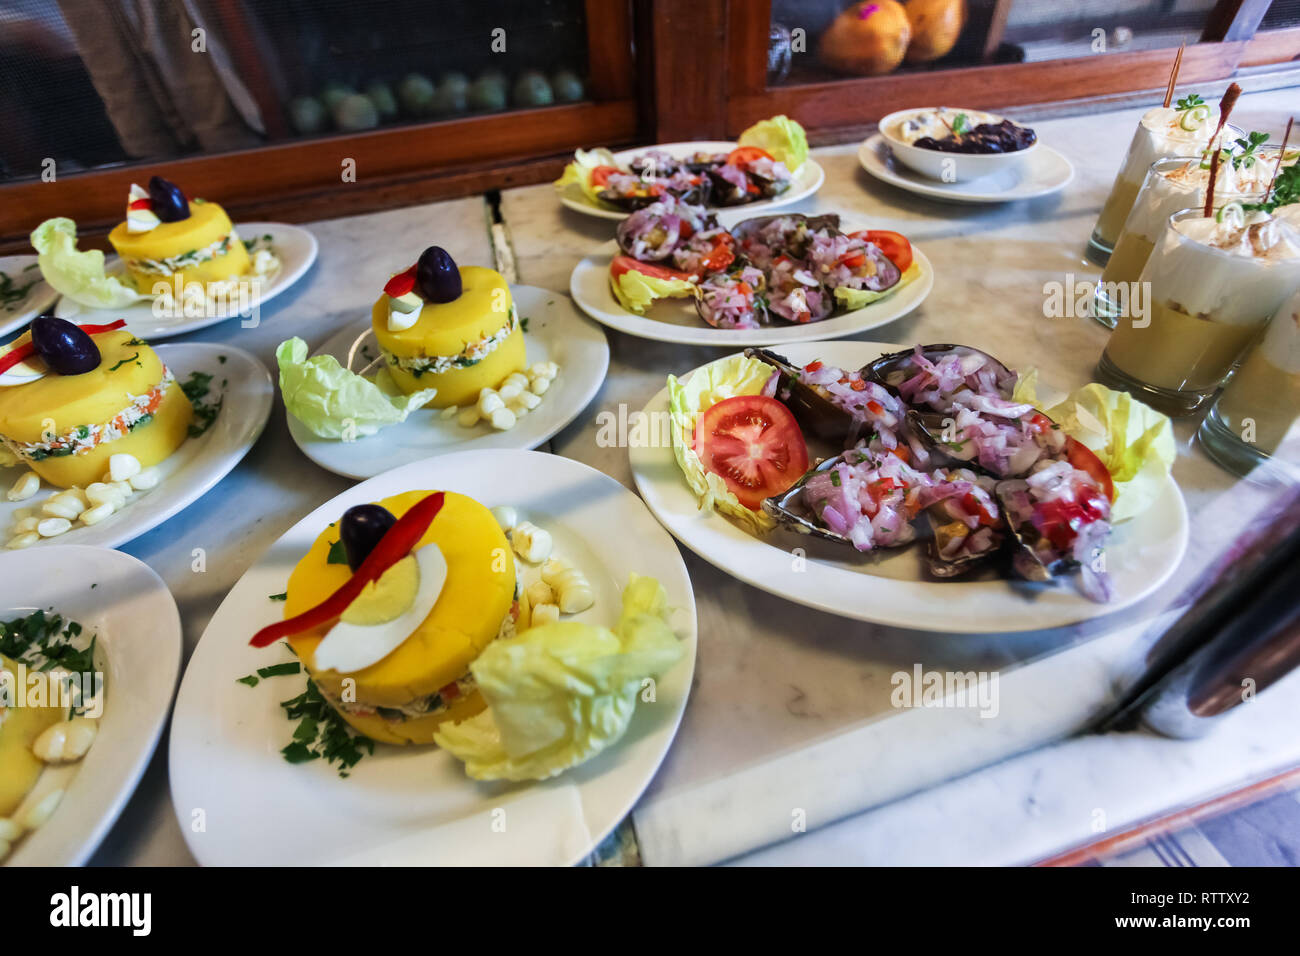 Typical dishes of Peruvian cuisine, made with potatoes, fish, eggs, shells Stock Photo